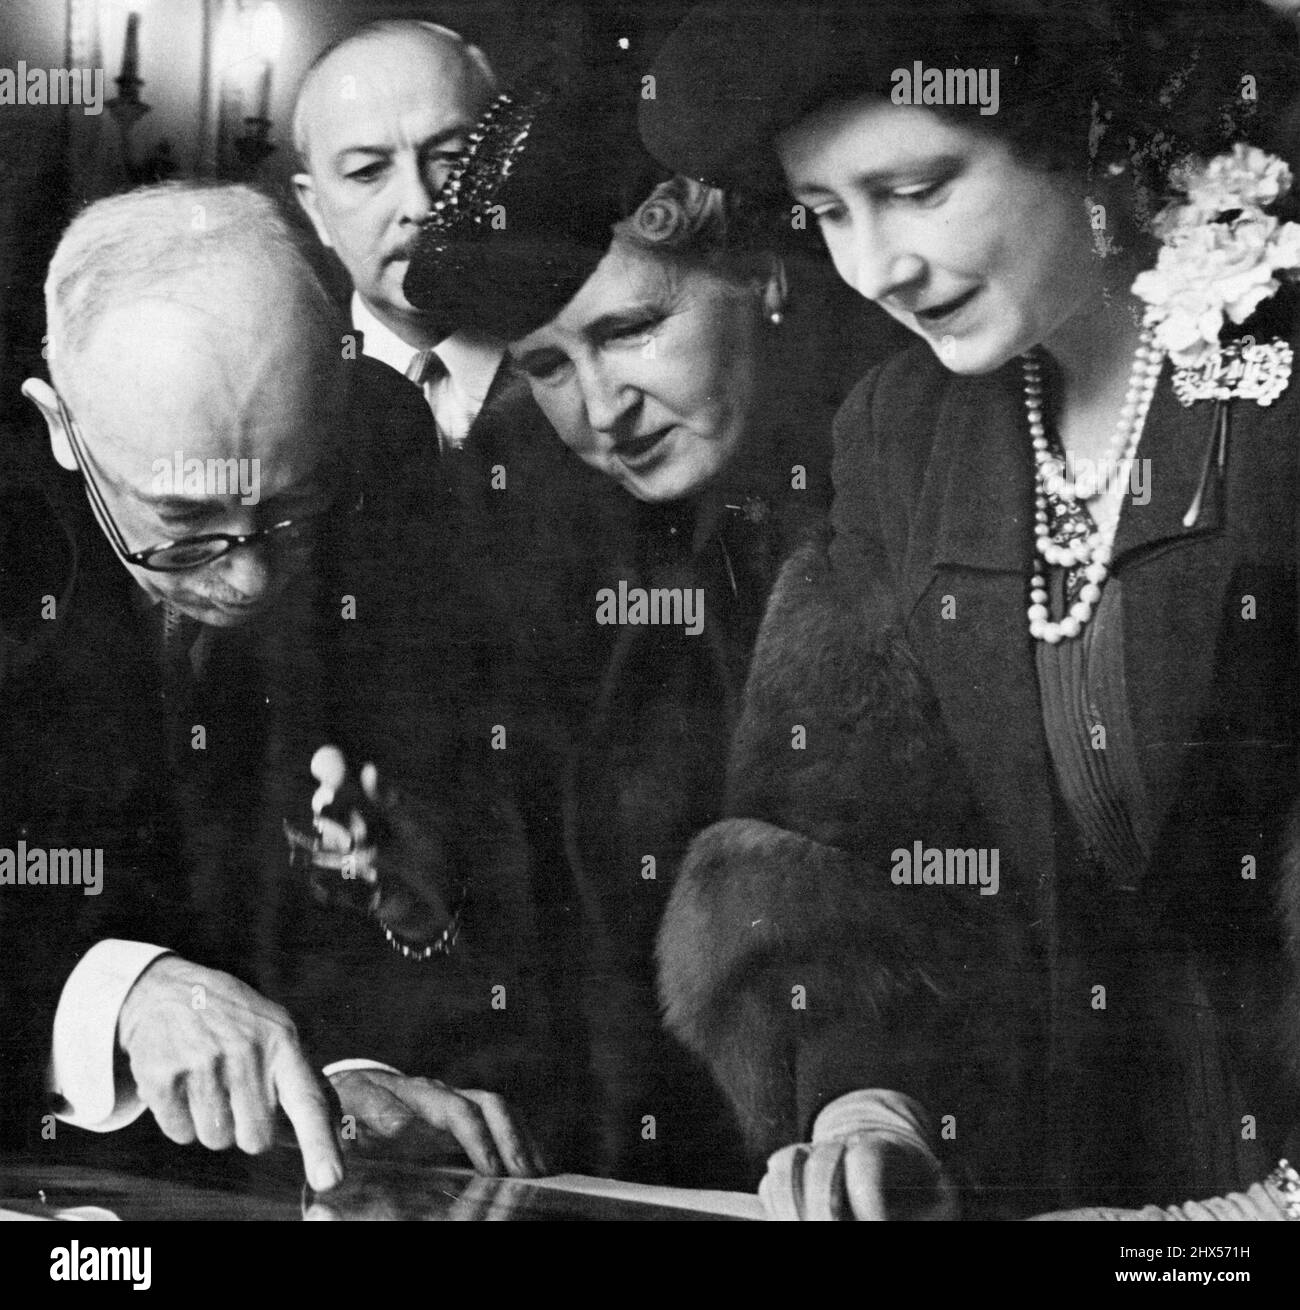 The Queen At the Czechoslovak Institute - Her Majesty the Queen, Madam Benes, Dr. Edward Benes President of the Czechoslovak Republic.Queen Elizabeth visted the Hollar exhibition at the Czechoslovak Institute, London. Her Majesty who was met by the President of Czechoslovakia and Madam Benes examined with interest the works of Wenceslas Hollar, the famous Czech engraver who is buried at St. Margaret's, Westminster.The Examination was organised by Dr. Goldschmidt. Dr. Goldschmidt is now a private in the Czechoslovak army in Great Britain, he is an outstanding authority on Hollar, Many of the ex Stock Photo